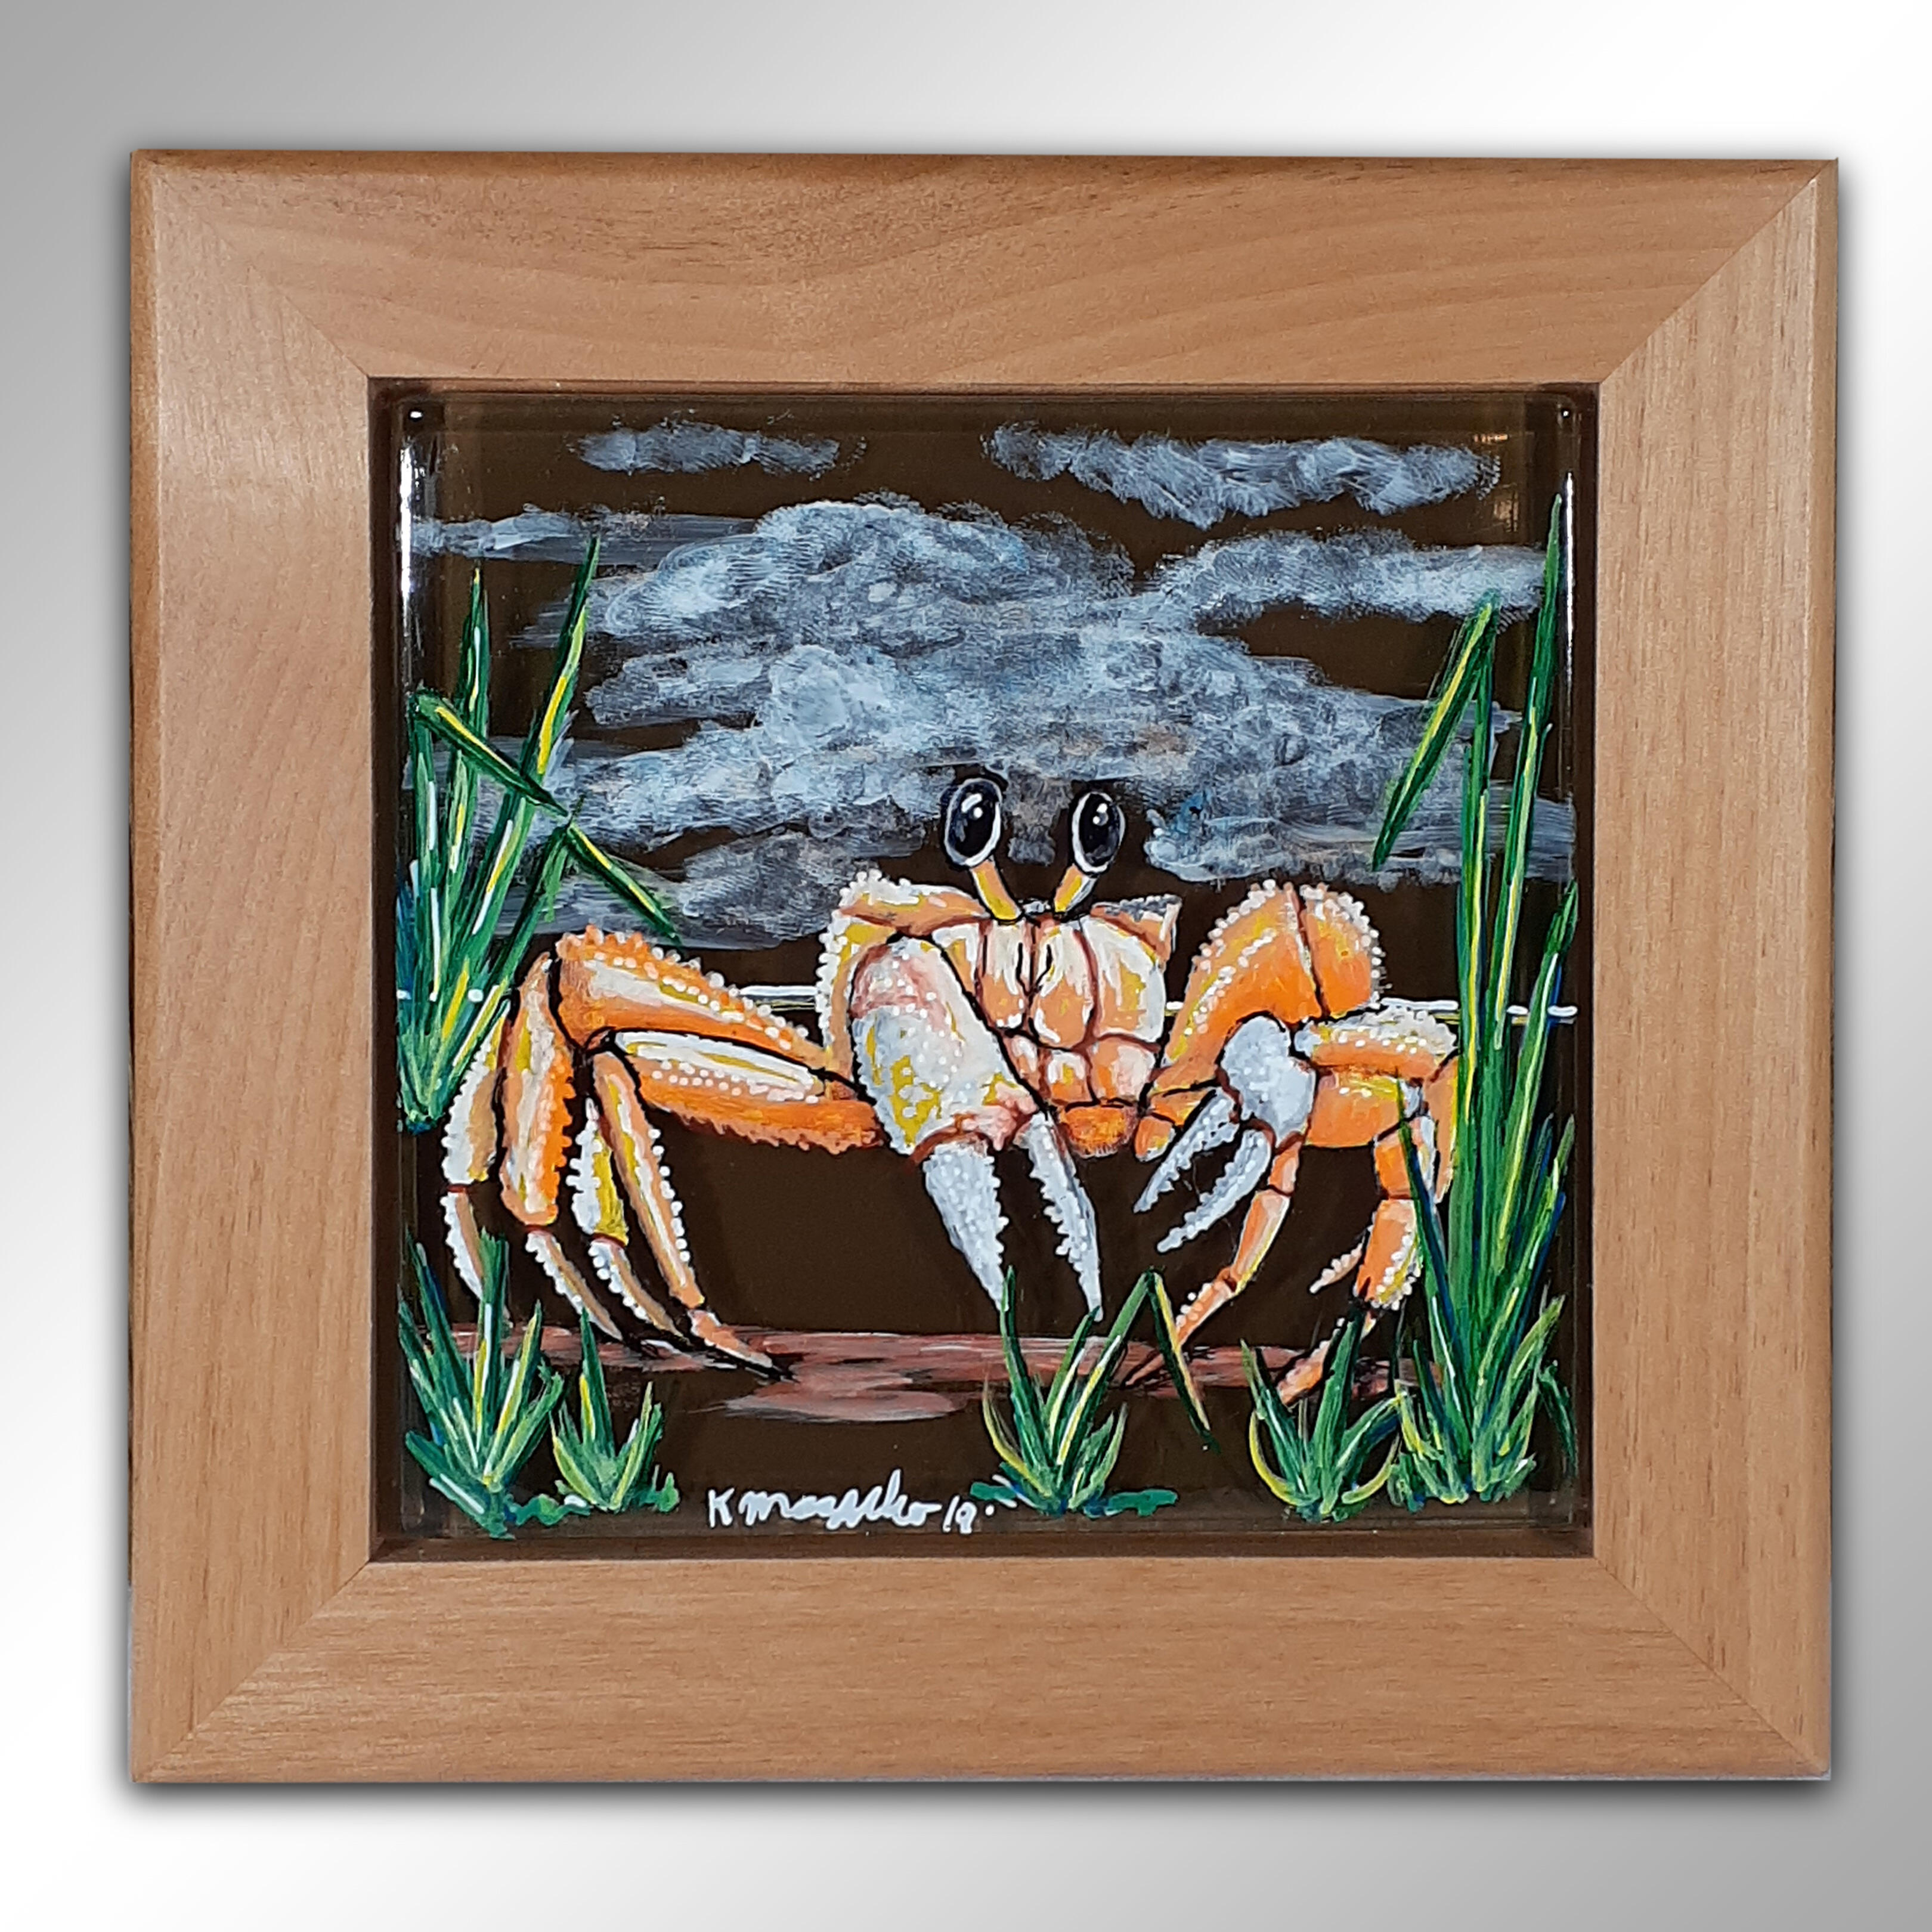 Hand Painted Ghost Crab Wall Tile